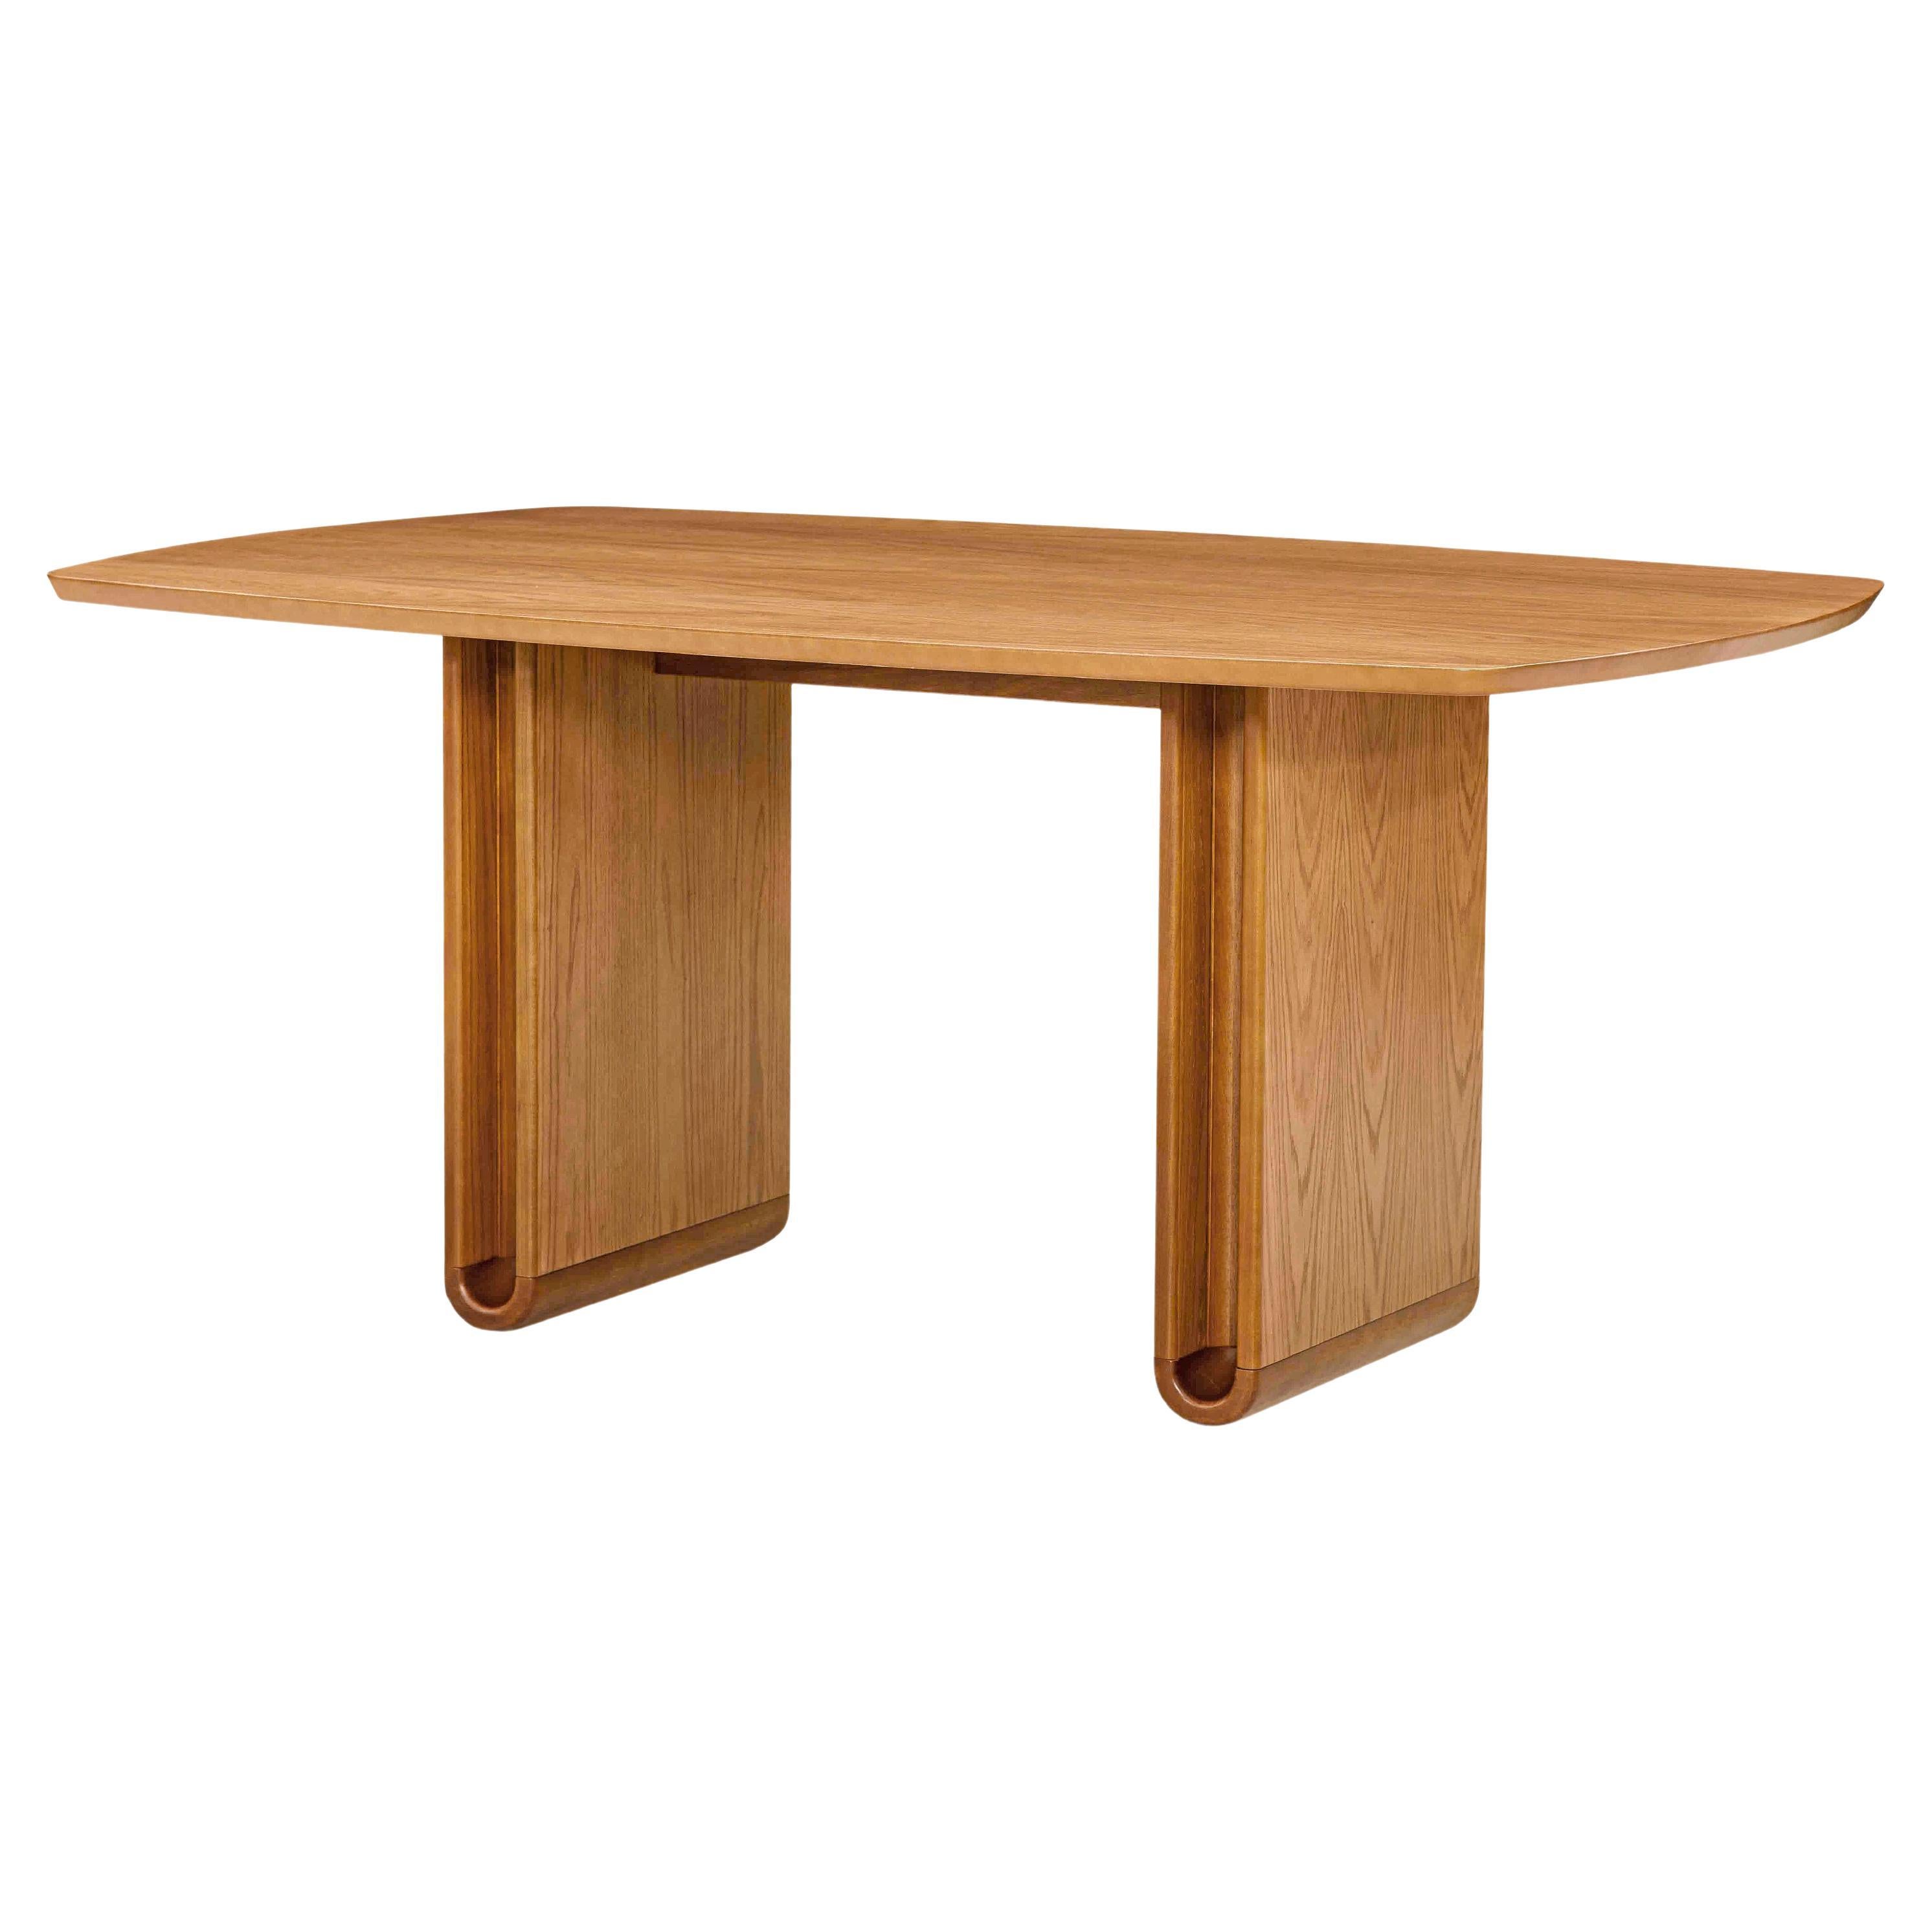 Neon Dining Table in Almond Oak Wood Finish 68'' For Sale